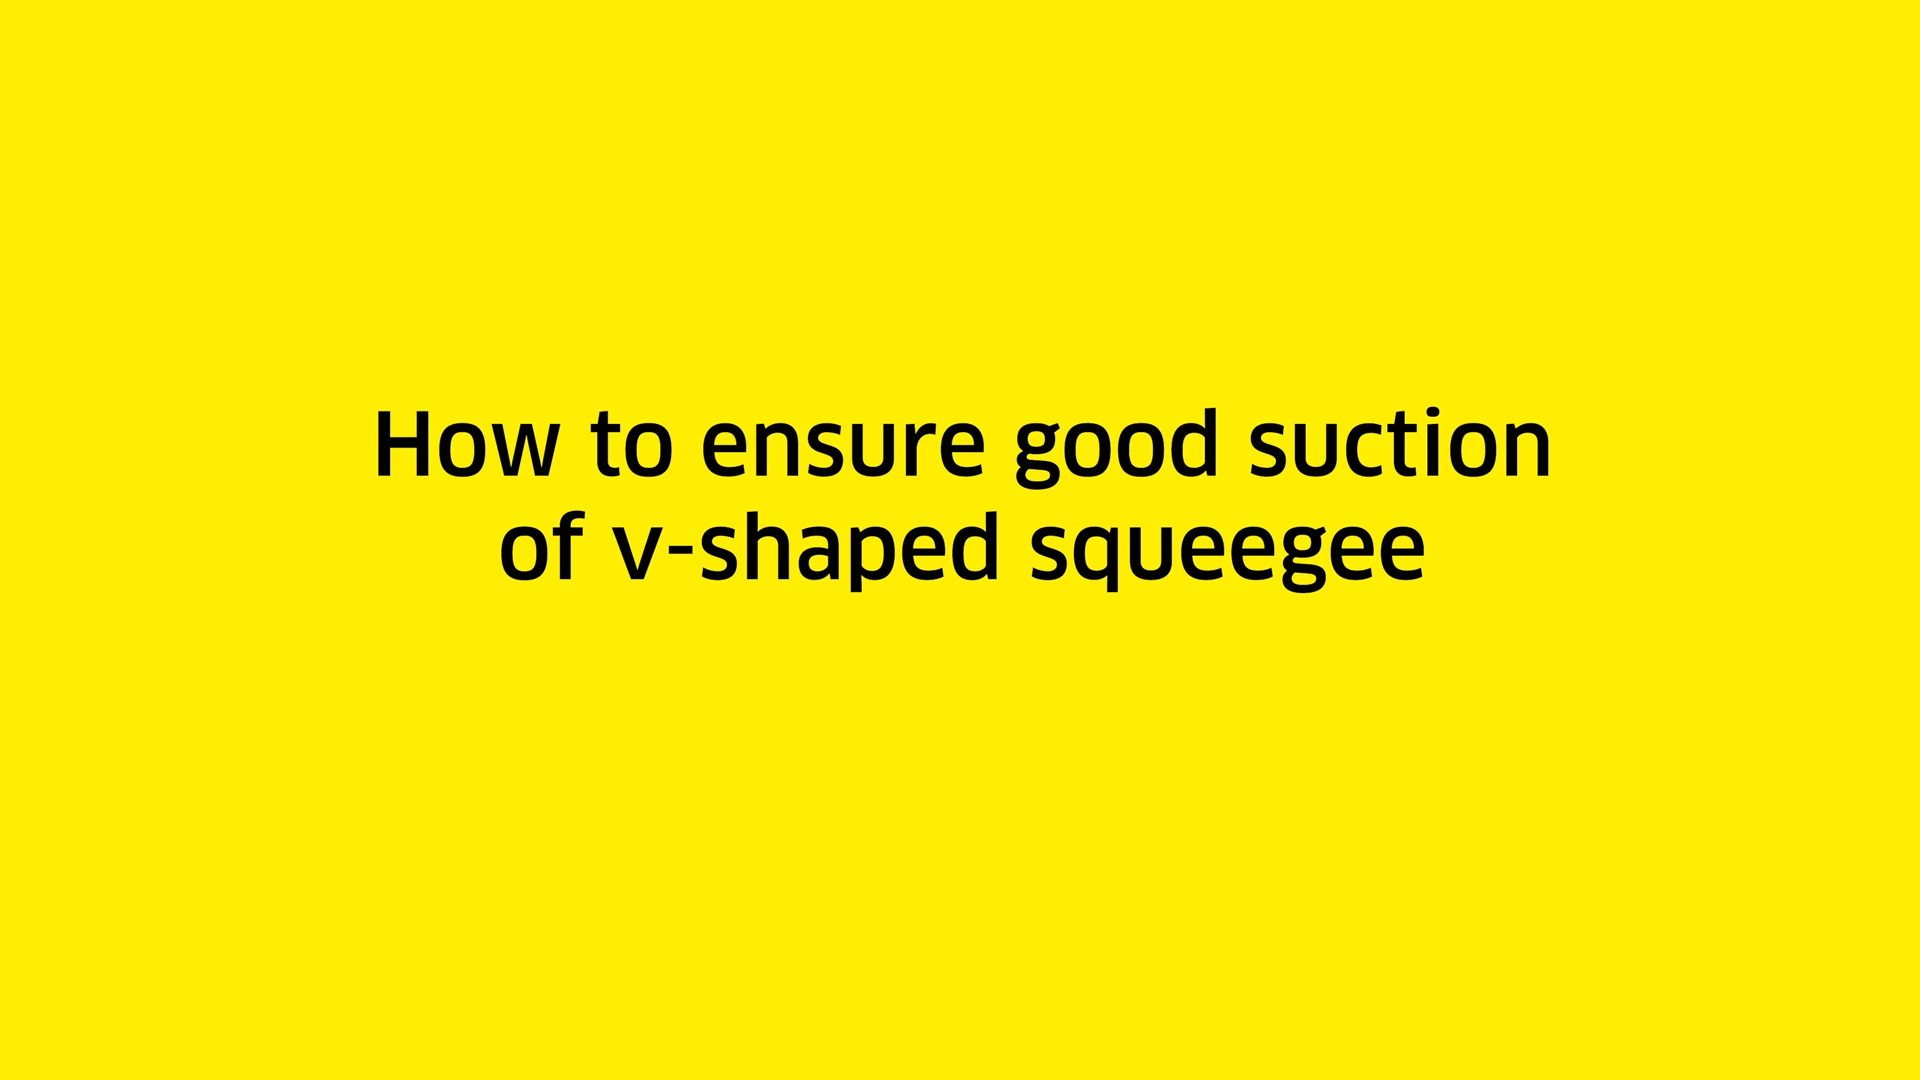 How to ensure good suction of V-shaped squeegee